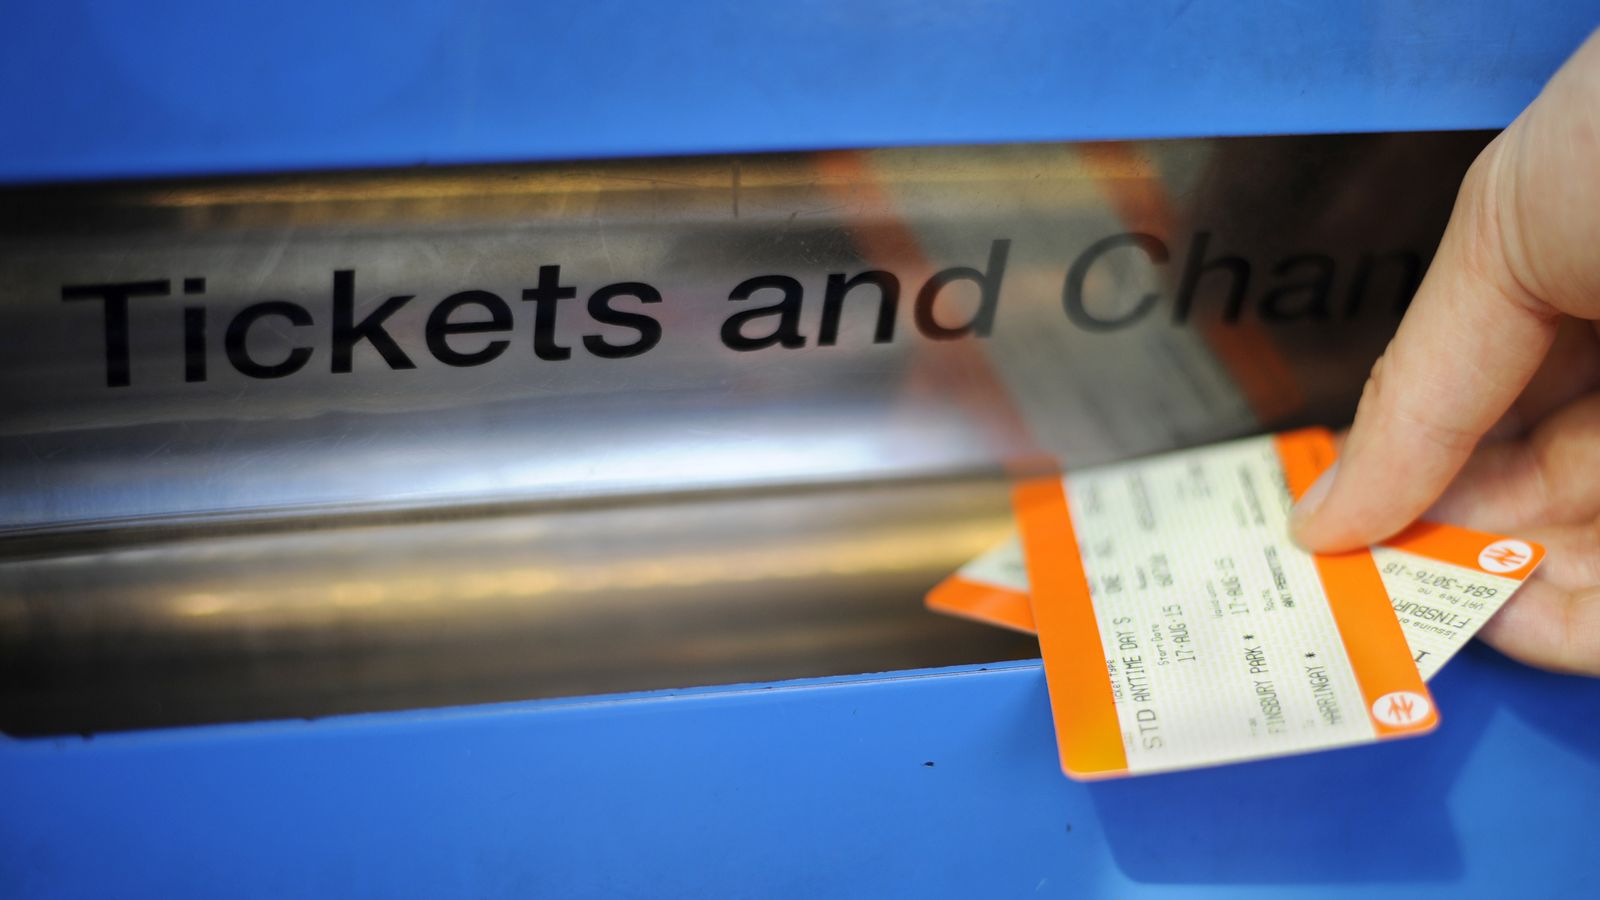 Regulated rail fares in England will increase by up to 5.9% from March